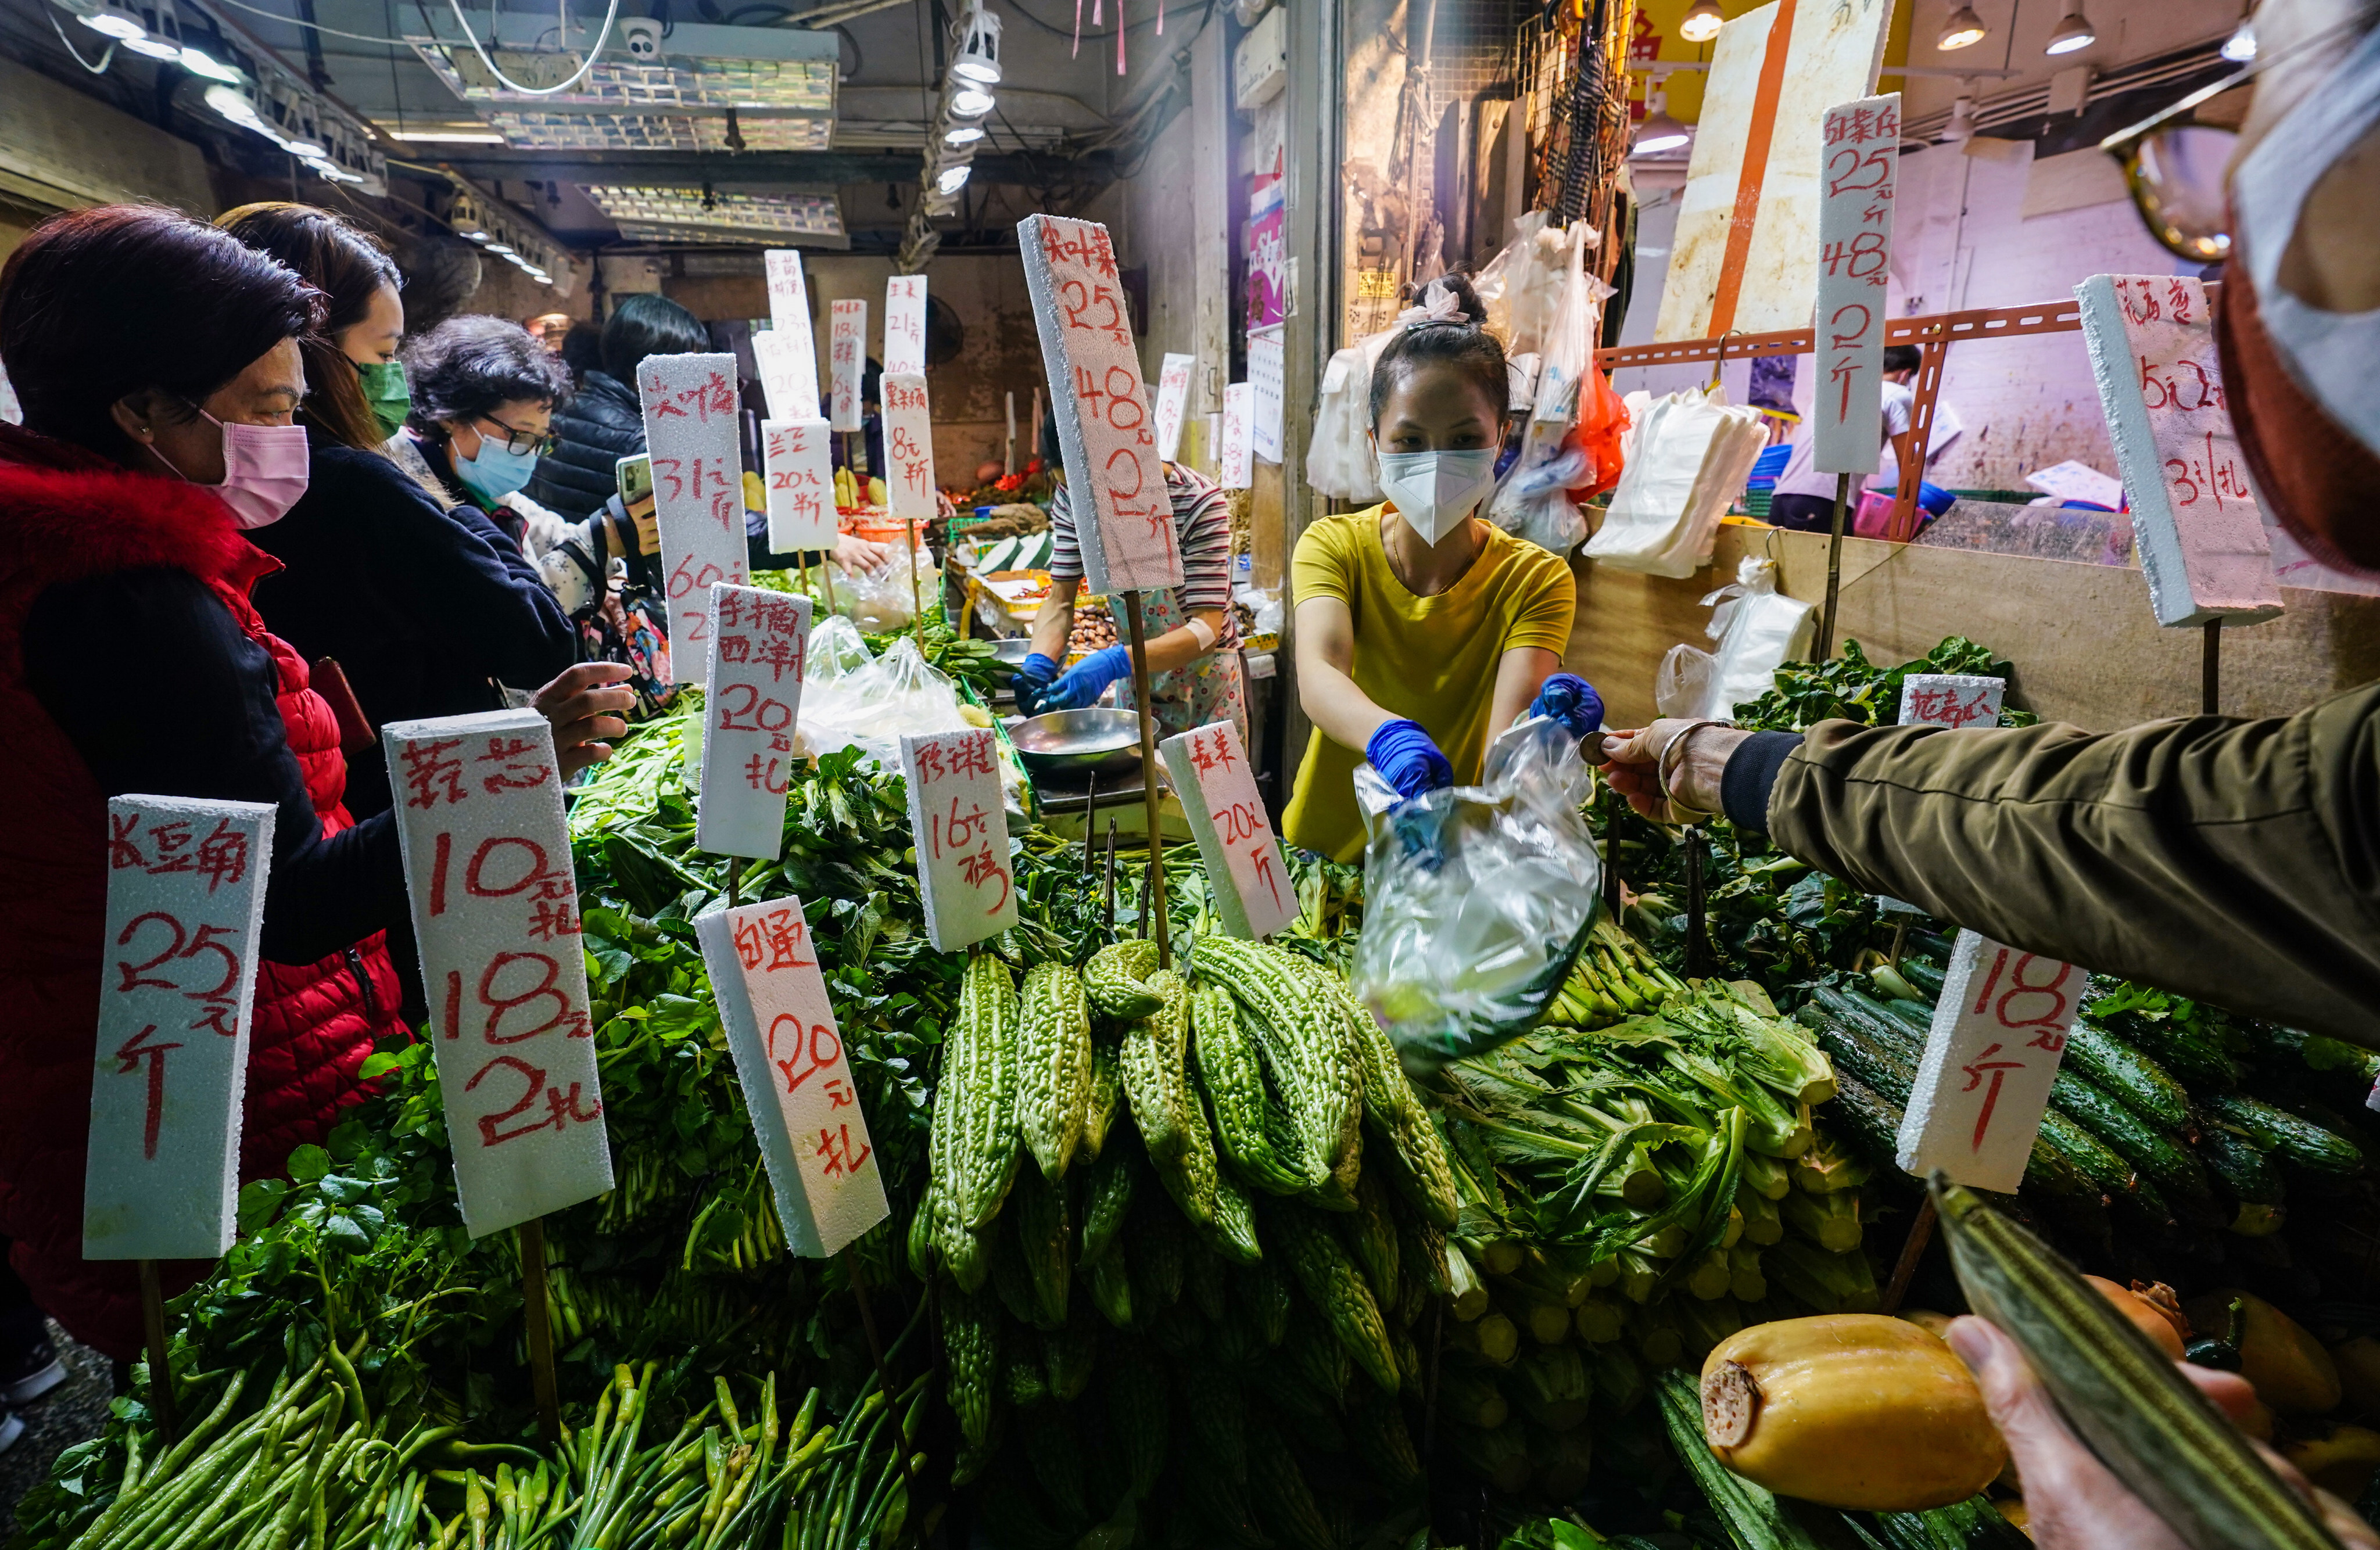 Vegetable prices have remained high for days in Hong Kong given the tighter supply. Photo: Felix Wong